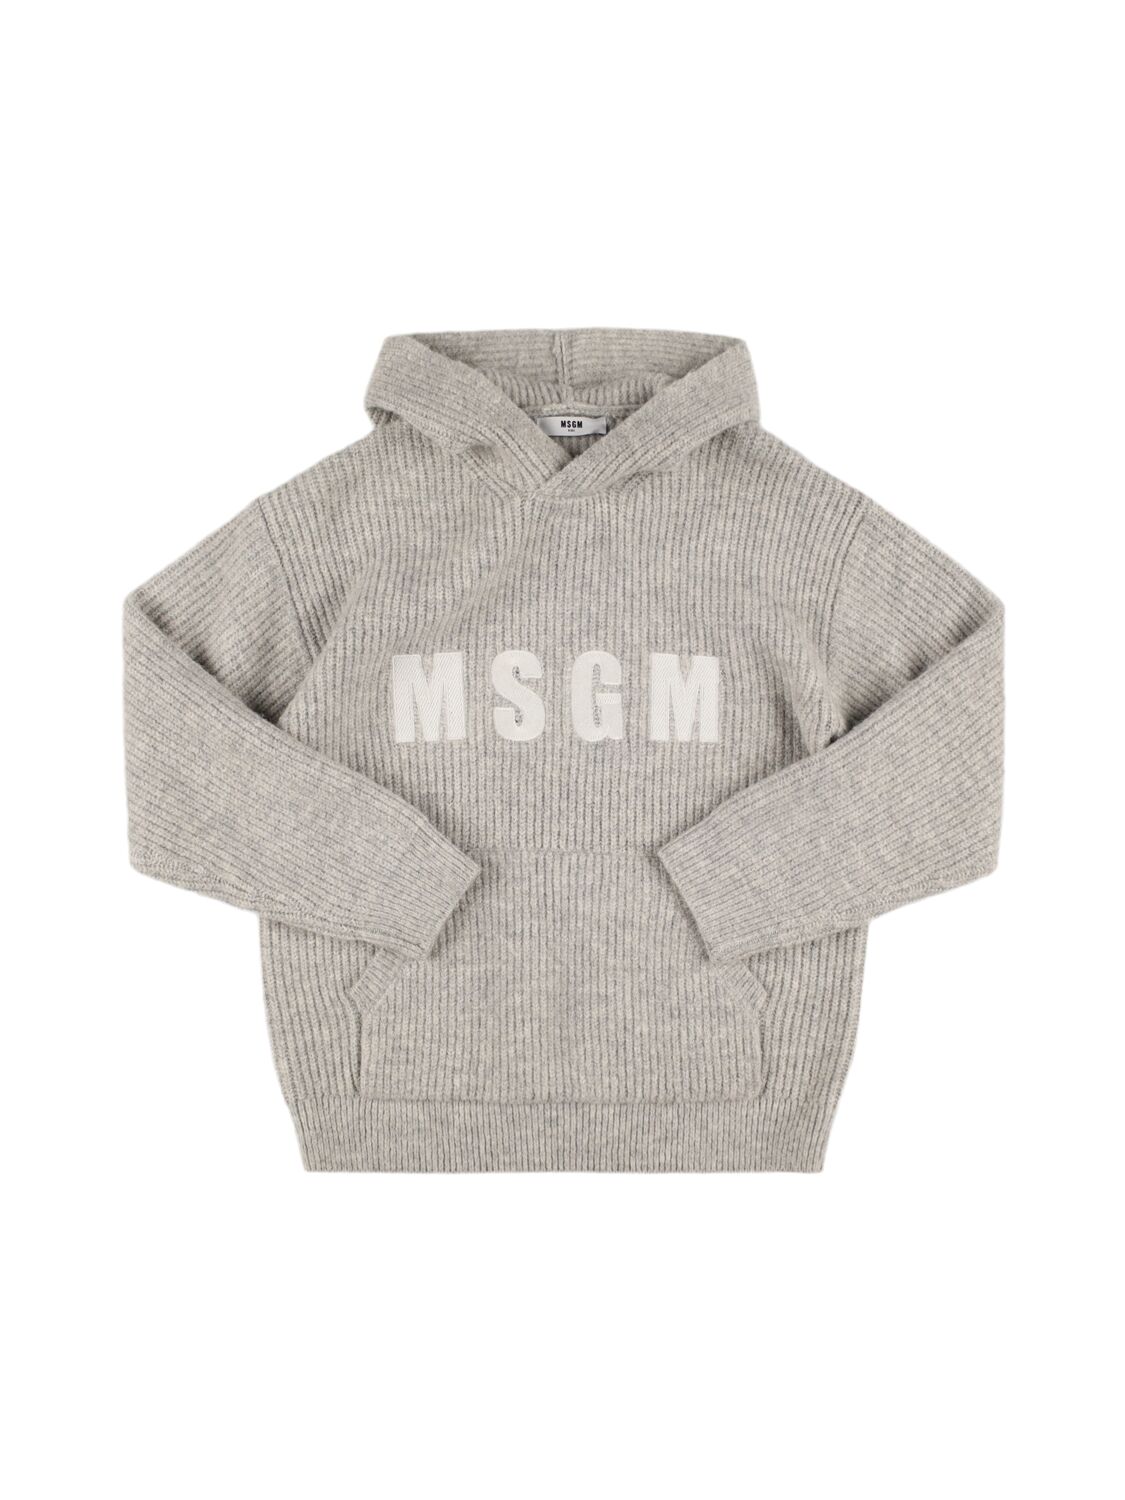 Msgm Acrylic Blend Knit Hooded Sweater In Gray